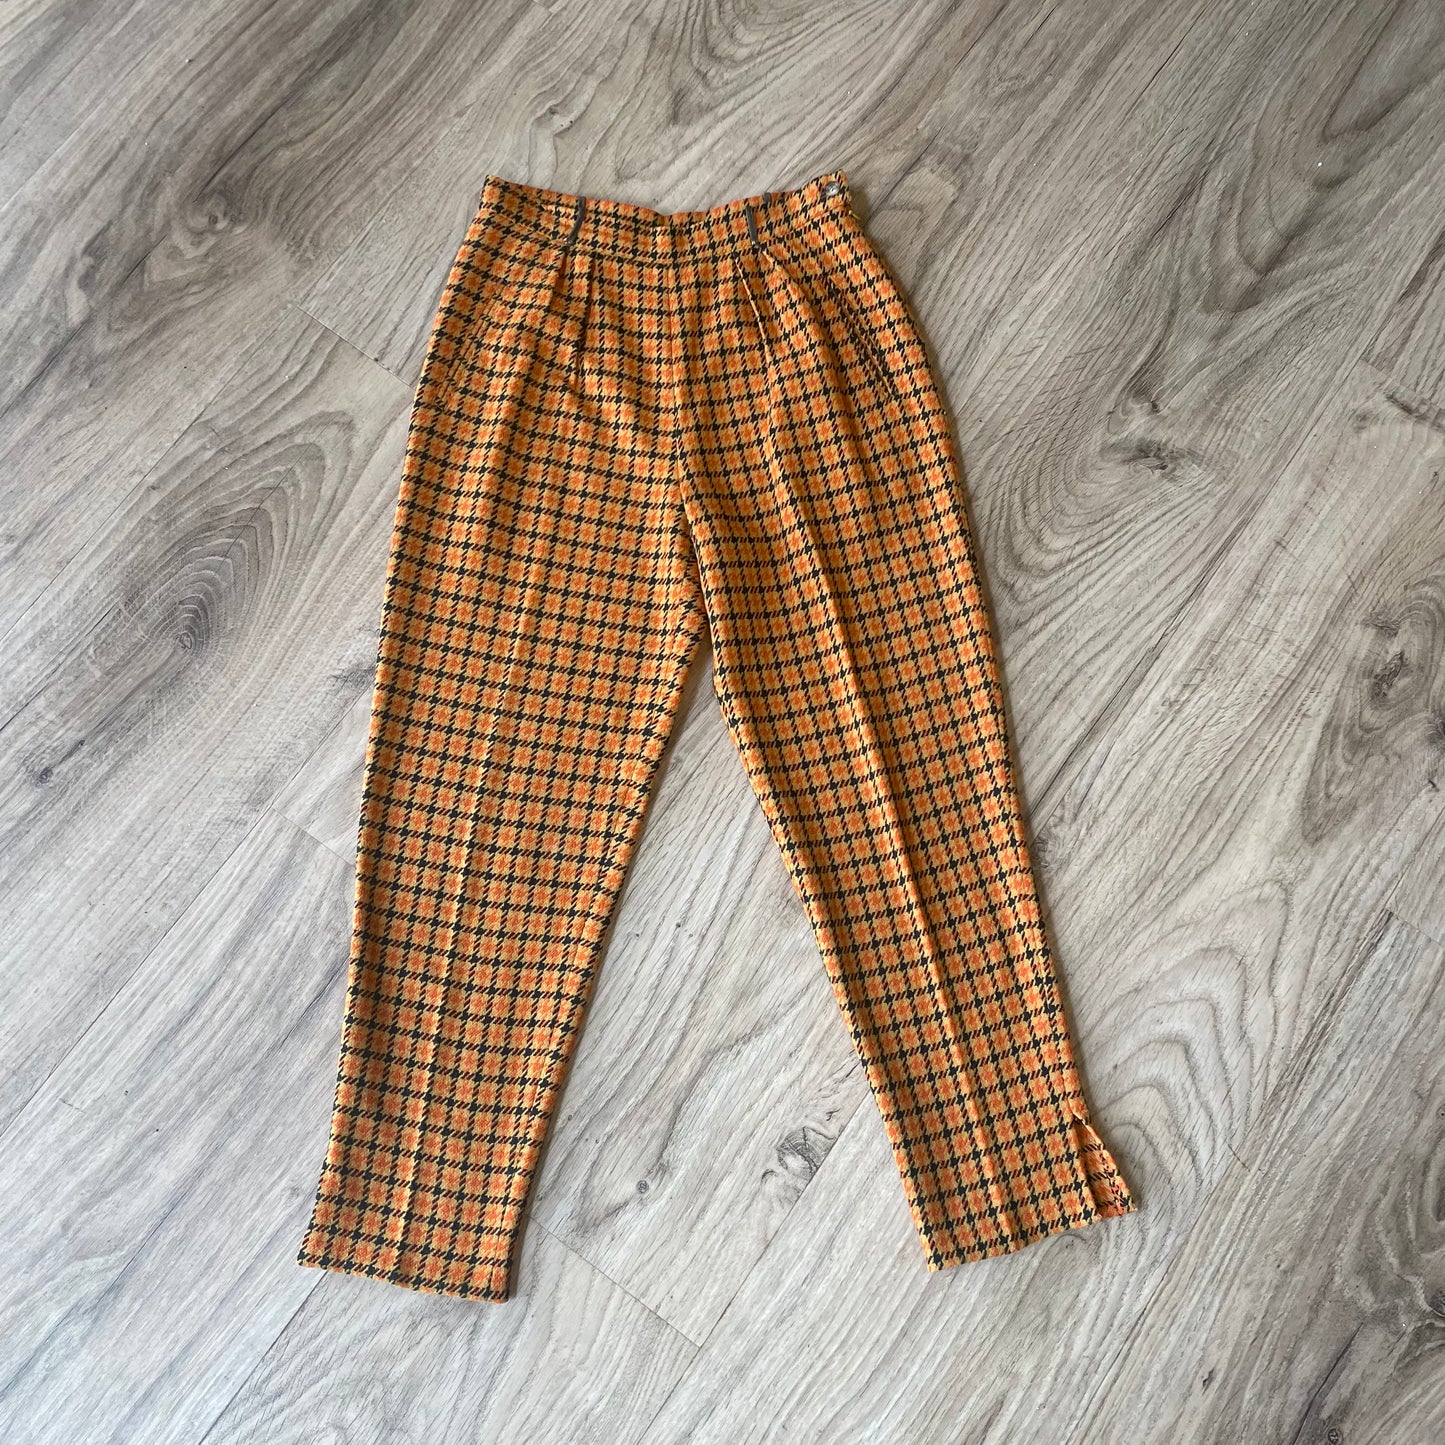 Rupert Houndtooth Trousers